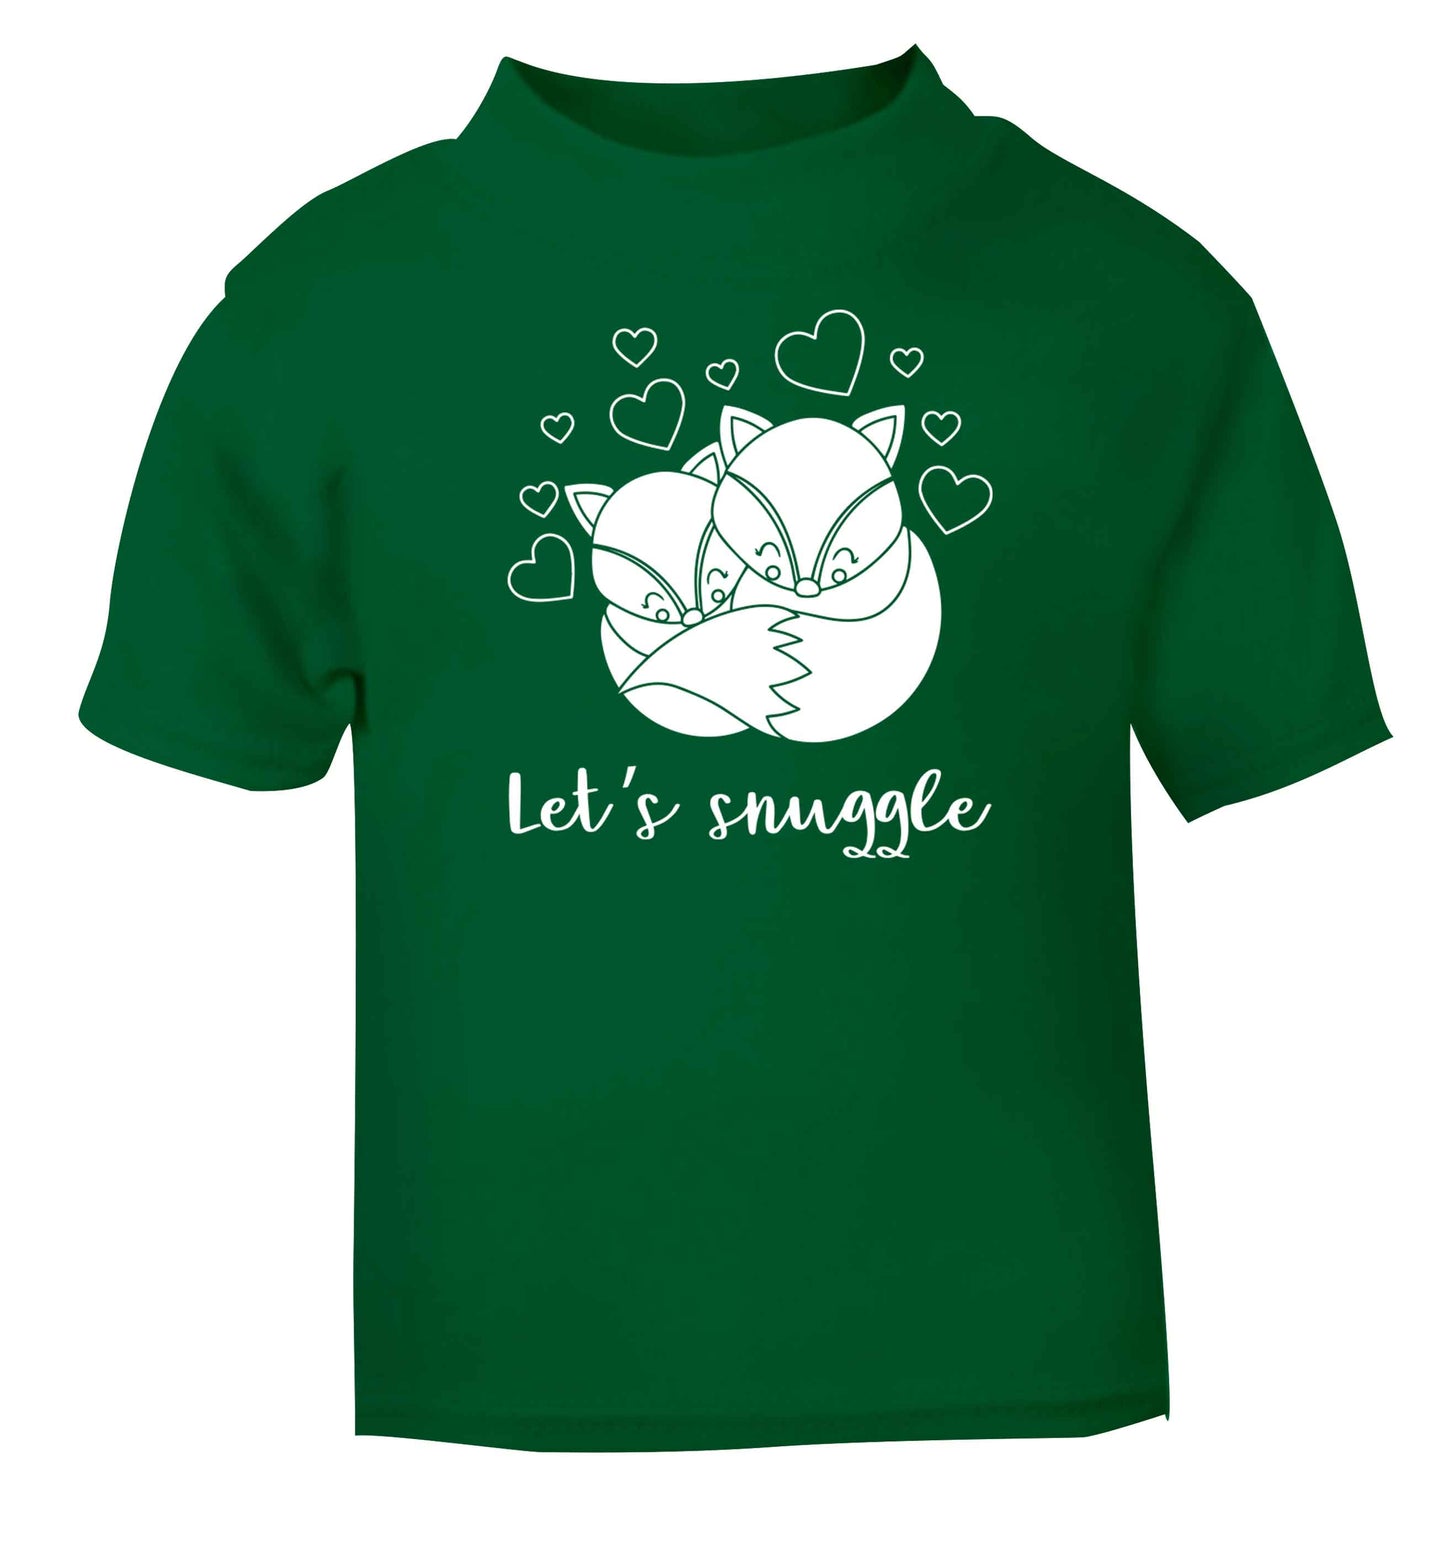 Let's snuggle green baby toddler Tshirt 2 Years